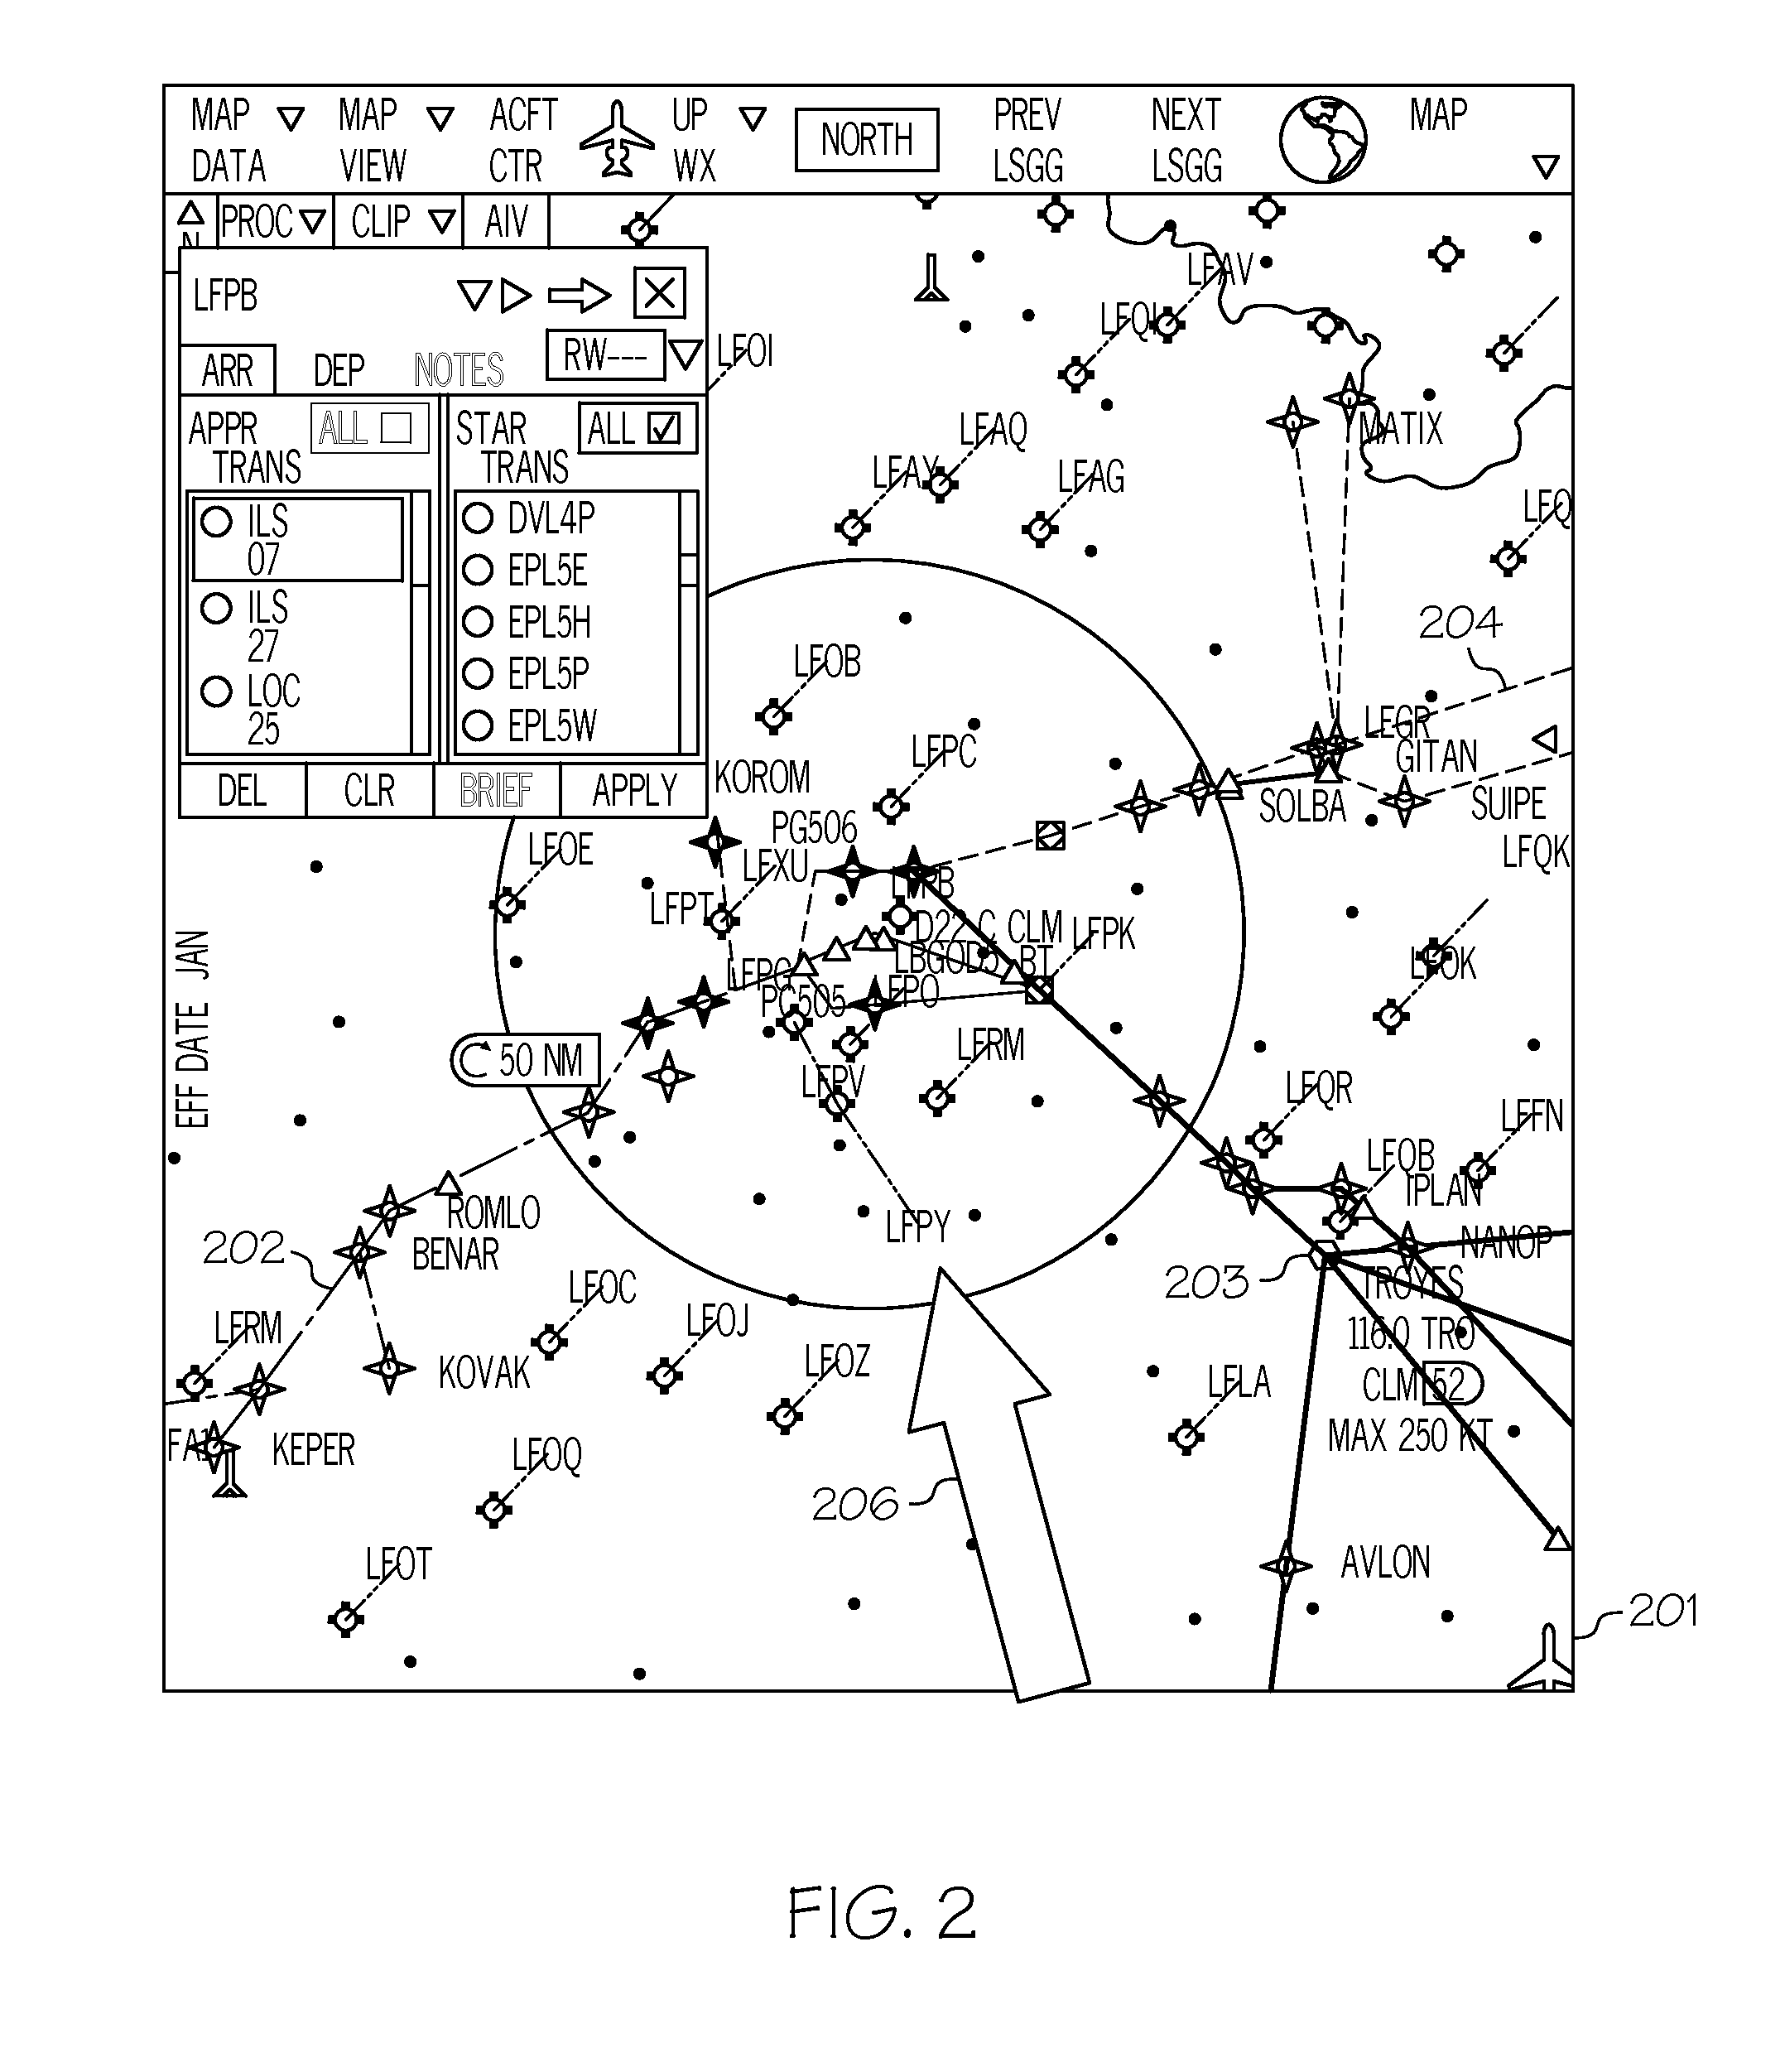 Methods and systems for displaying procedure information on an aircraft display